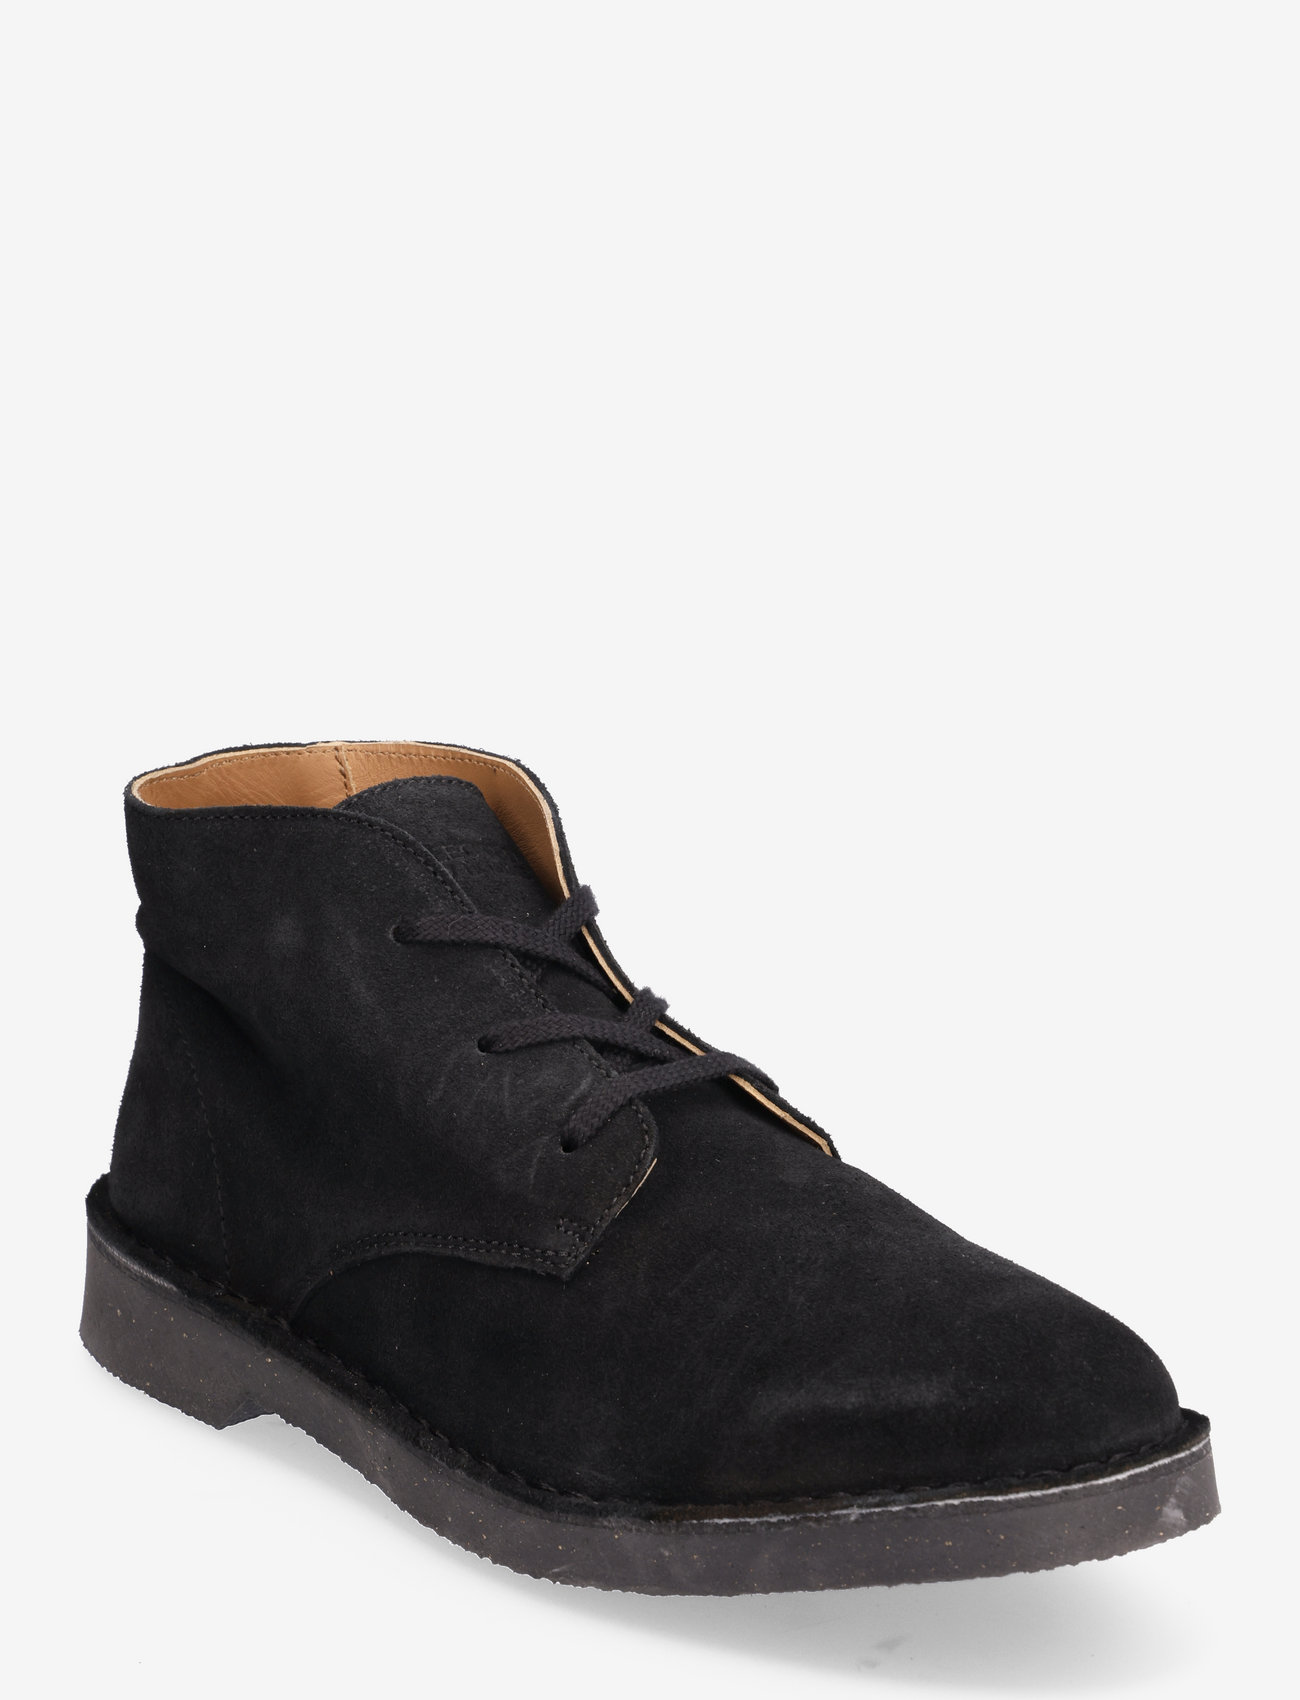 Selected Homme - SLHRIGA NEW SUEDE CHUKKA BOOT B - aavikkokengät - black - 0